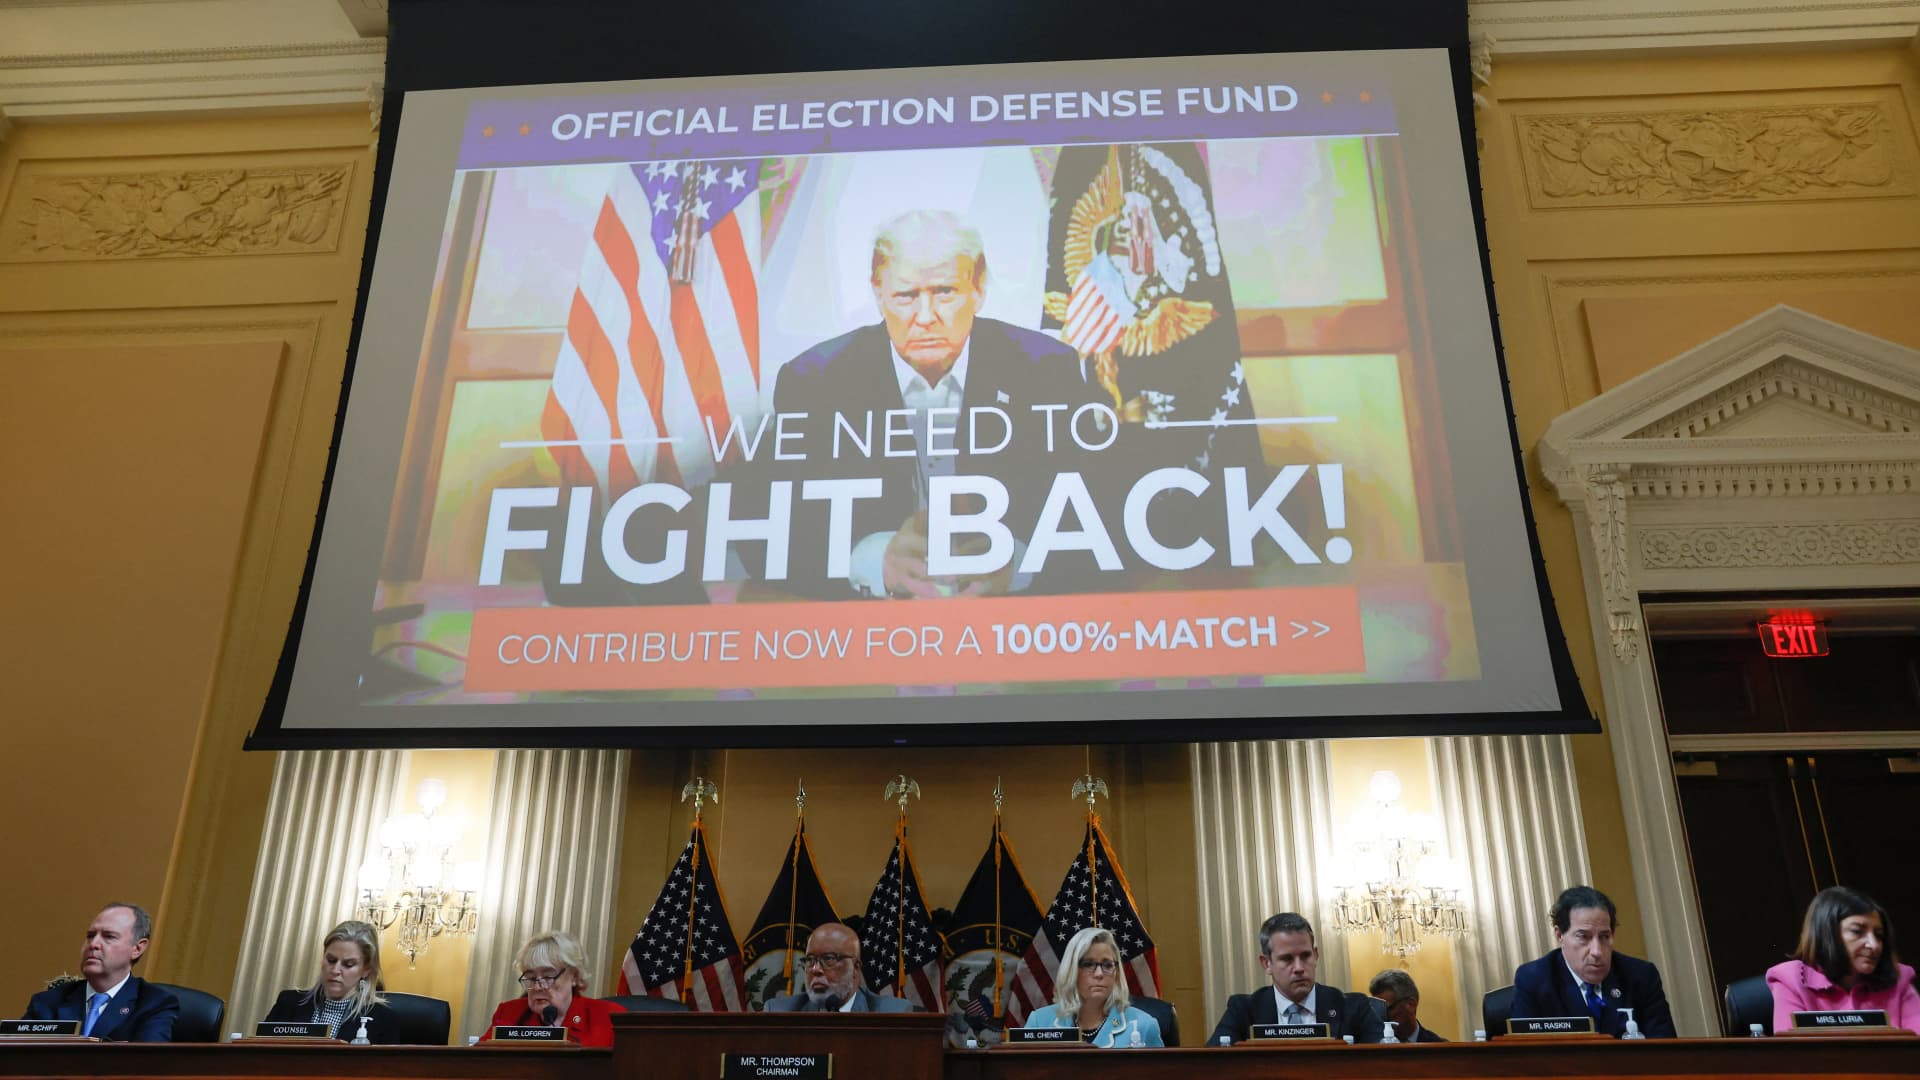 An advertisement soliciting donations for former U.S. President Donald Trump is seen as it was introduced as evidence and displayed on a screen above U.S. Representative Zoe Lofgren (D-CA), Chairperson Bennie Thompson (D-MS) , Vice Chair U.S. Representative Liz Cheney (R-WY) and U.S. Representative Adam Kinzinger (R-IL) holding the second public hearing of the U.S. House Select Committee to Investigate the January 6 Attack on the United States Capitol, at Capitol Hill, in Washington, U.S. June 13, 2022.